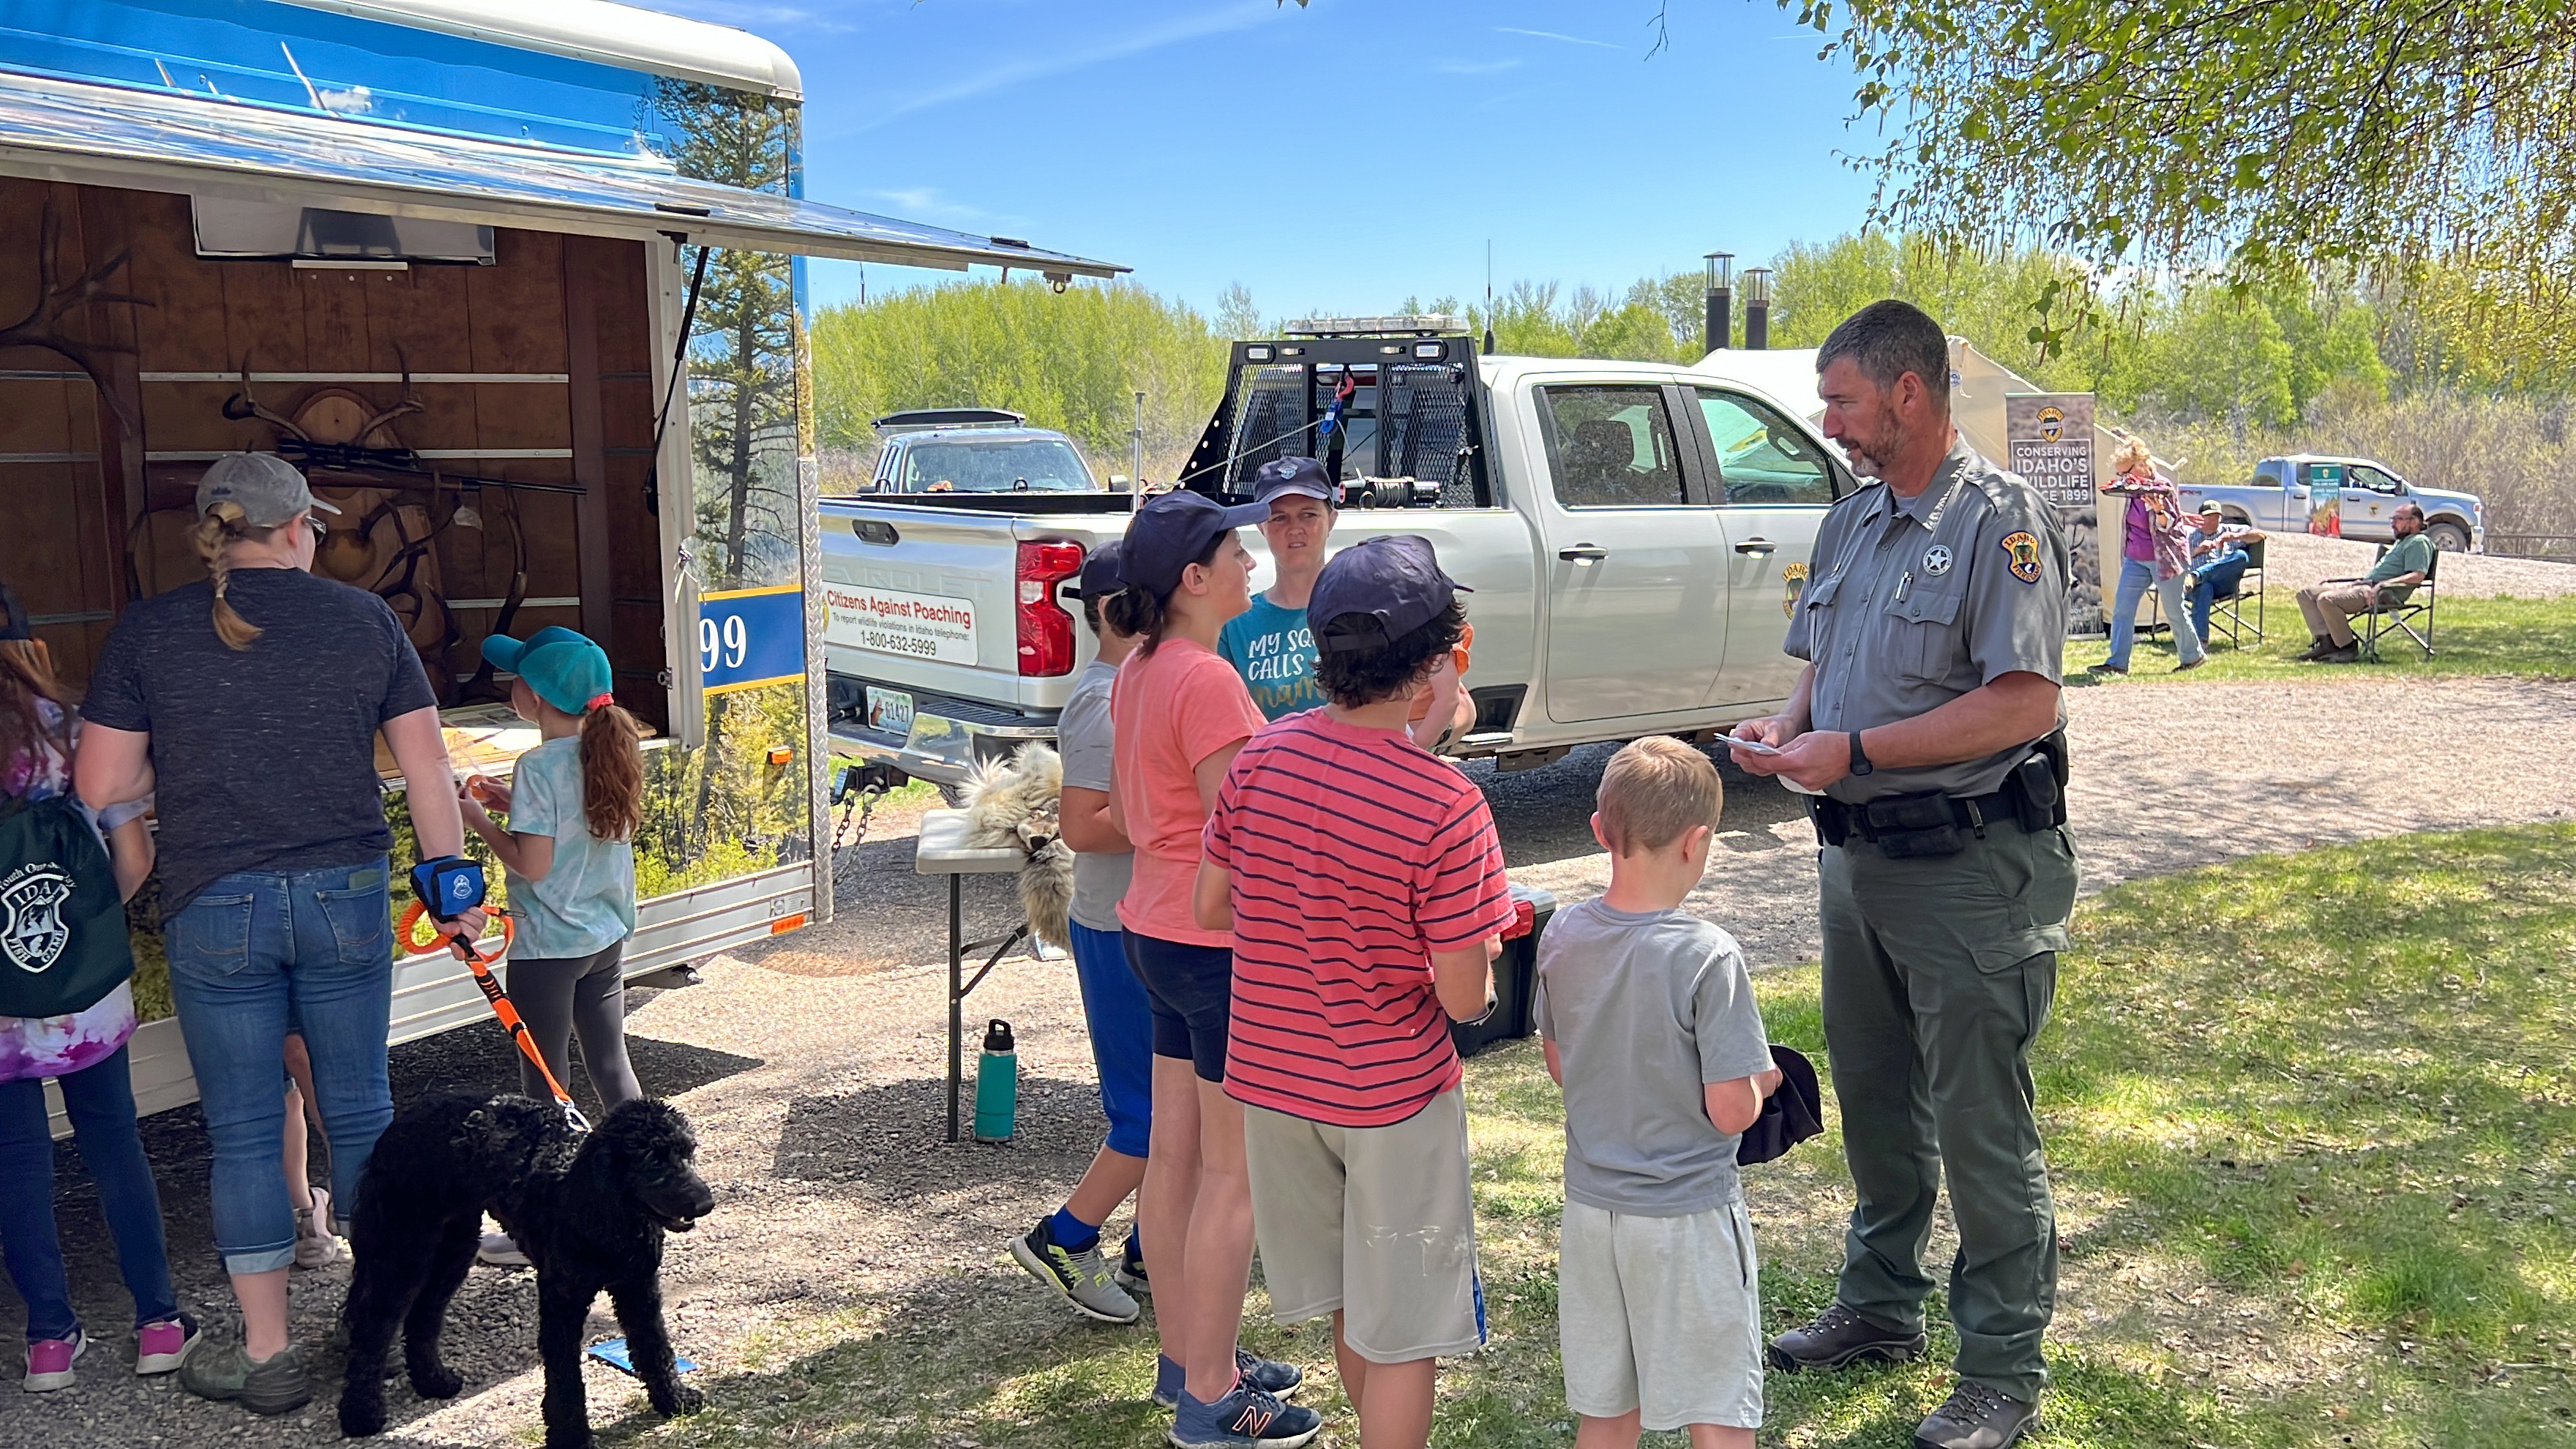 Conservation Officer teaching kids about the Citizens Against Poaching trailer.